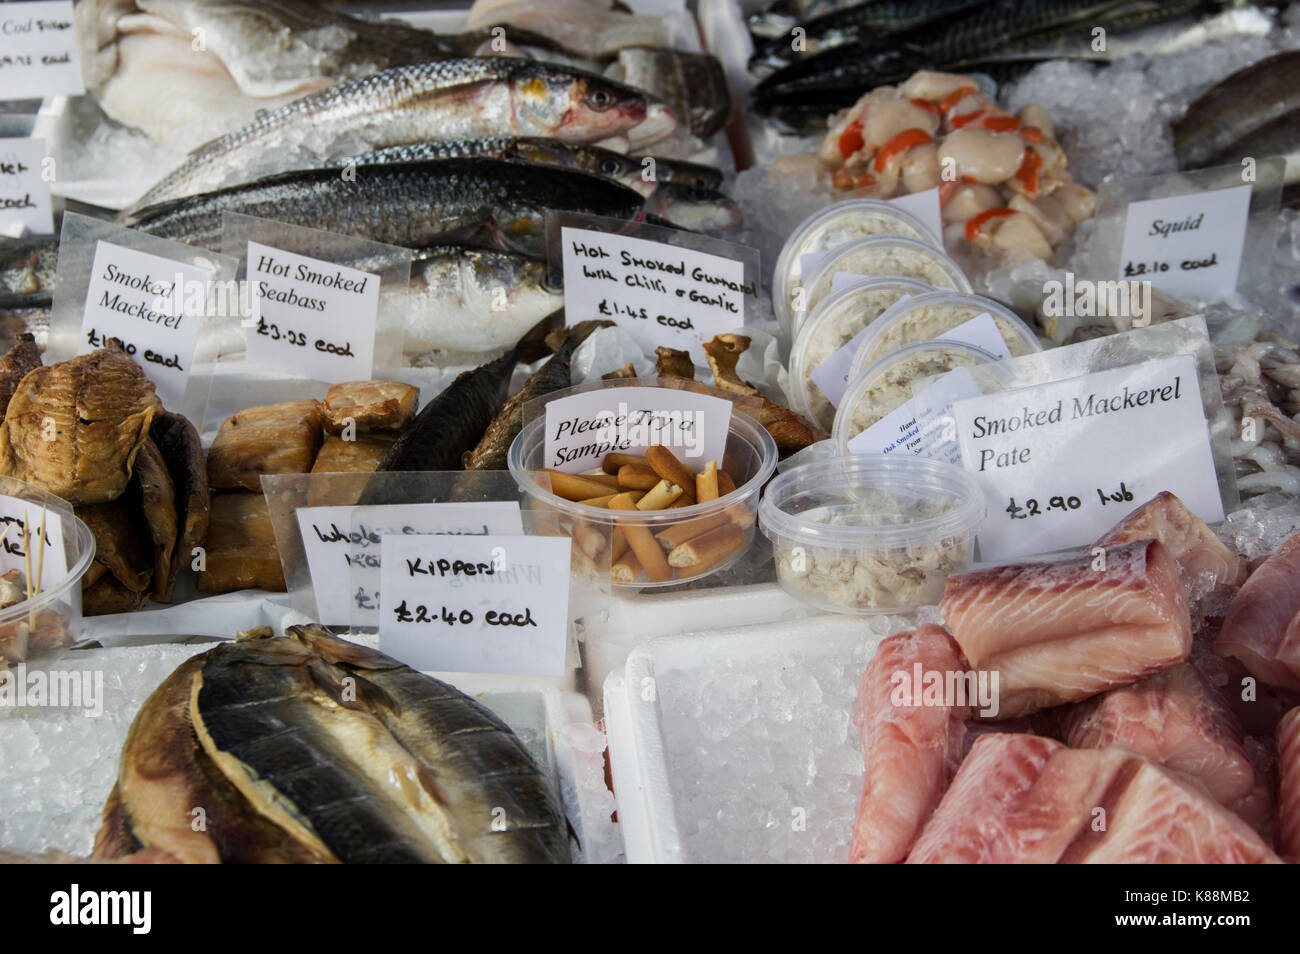 Fish, scallops and smoked filets on sale in a market in London with free samples offered to taste Stock Photo